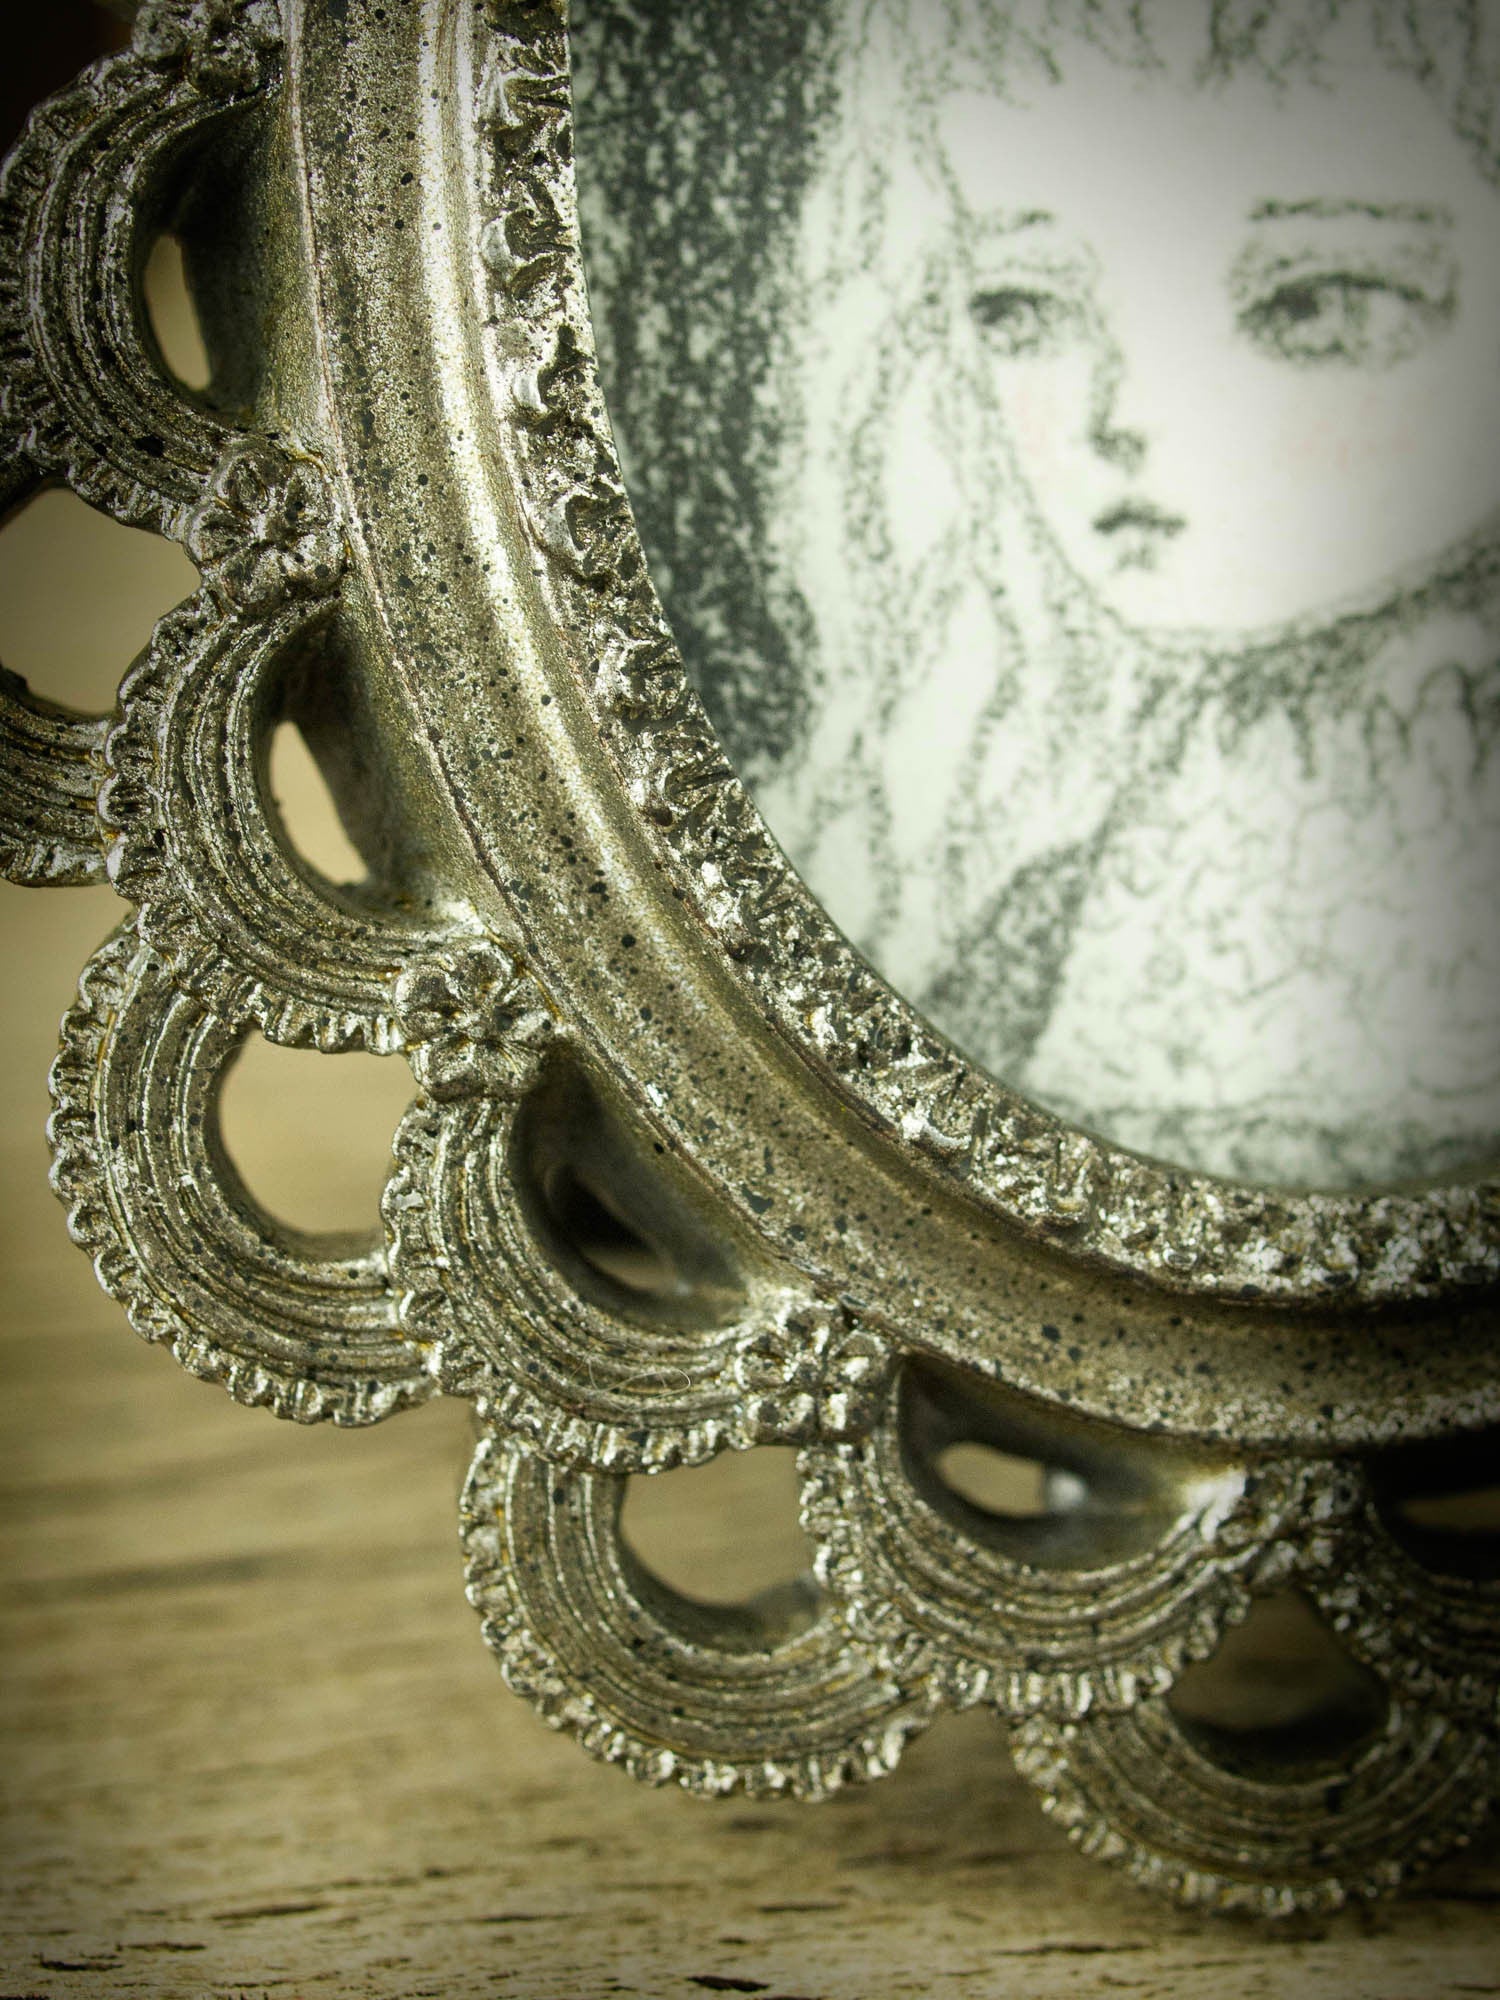 This is a very simple drawing in pencil by Danita Art, with just a little bit of rouge red on her cheeks. I love the vintage style of the image, and the little frame that comes with it it's just perfect for her.